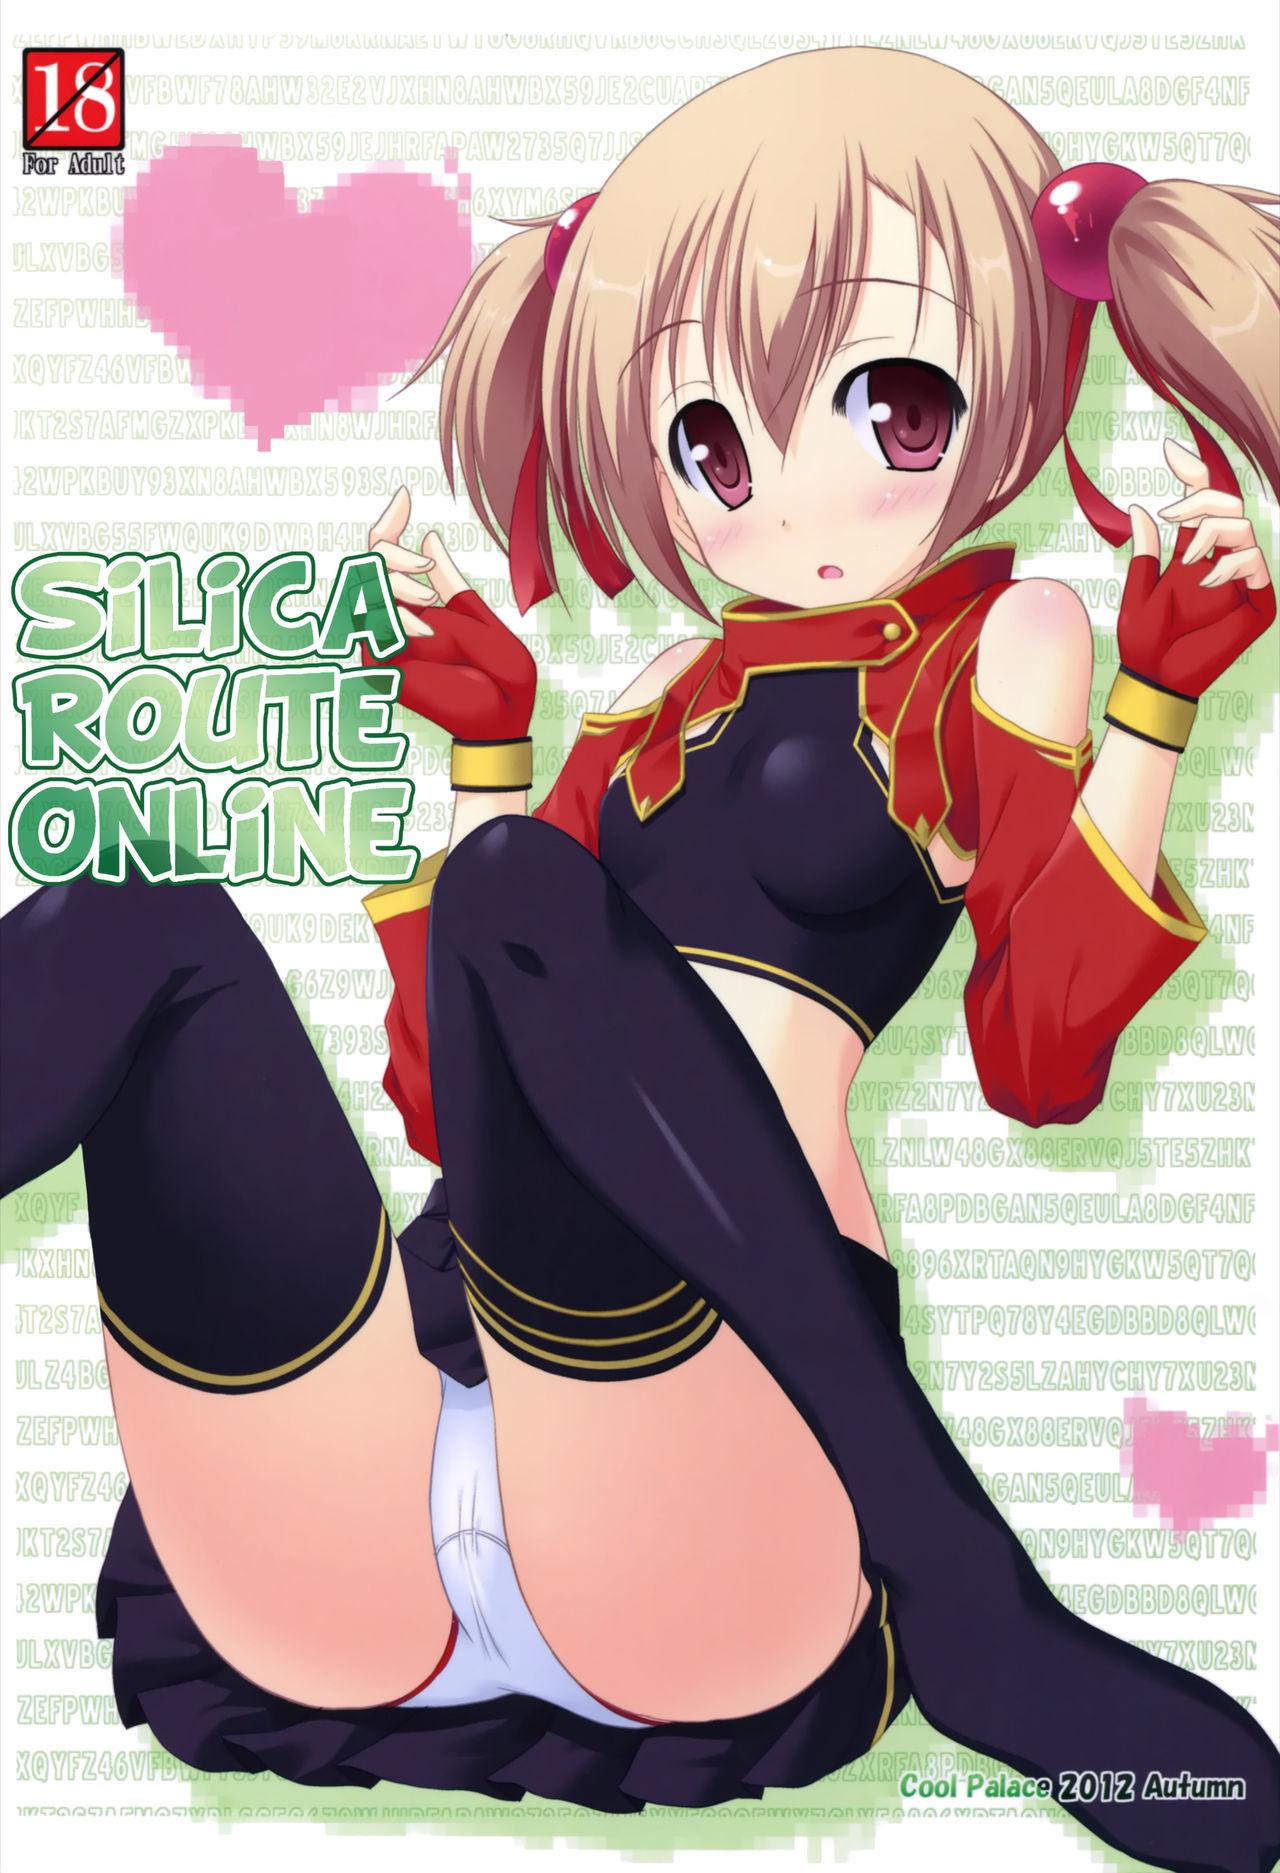 Class Room Silica Route Online - Sword art online Tittyfuck - Picture 1